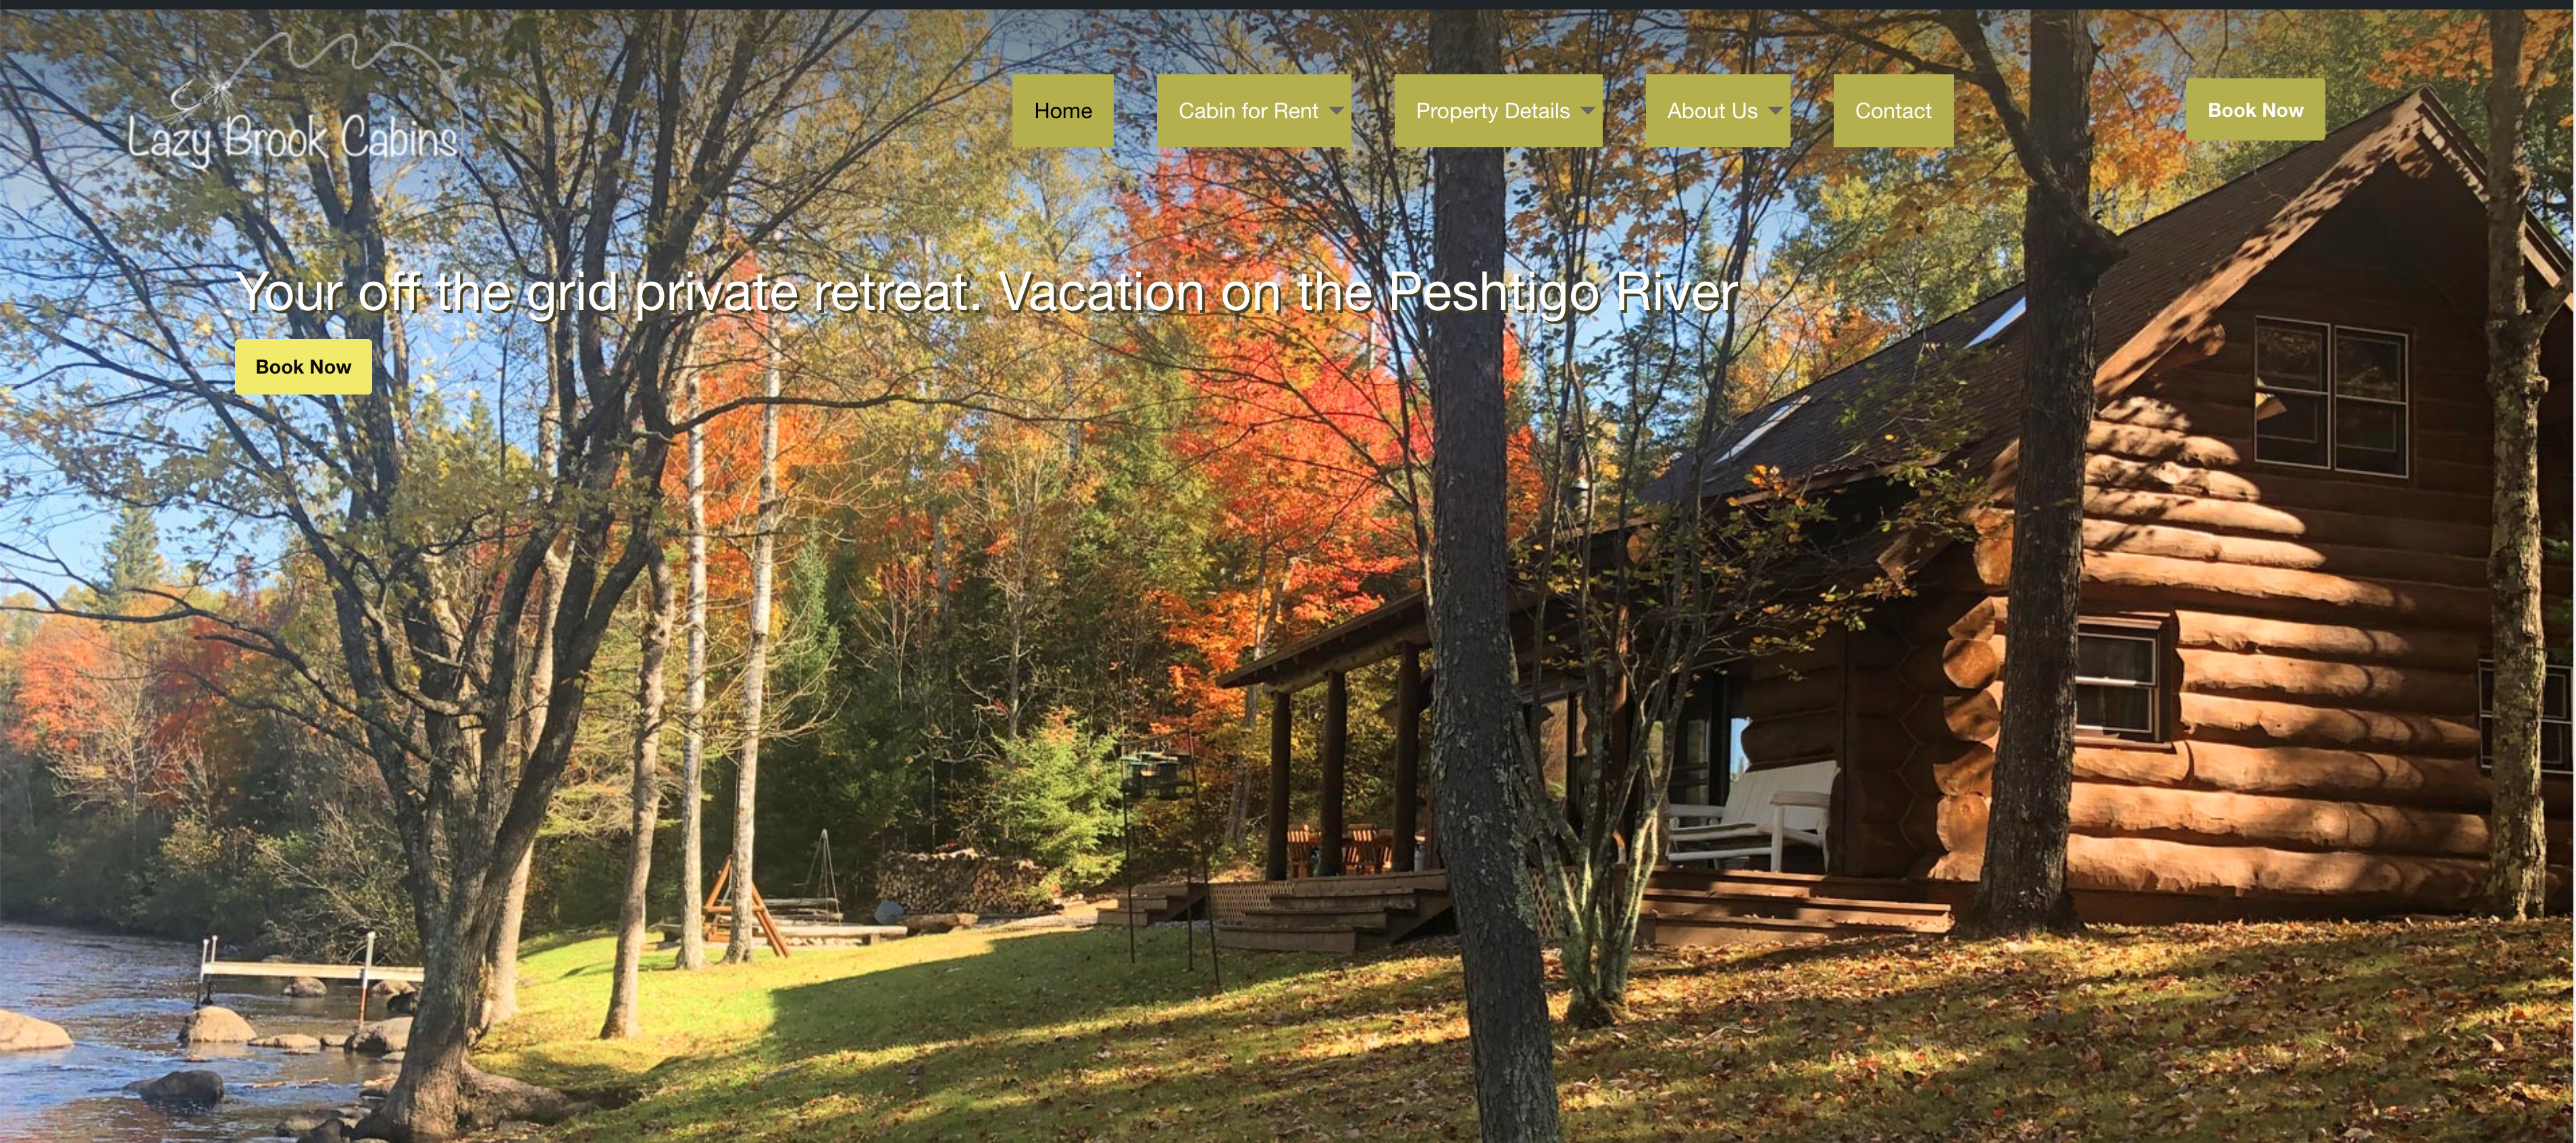 lazy brook cabin rental homepage picture